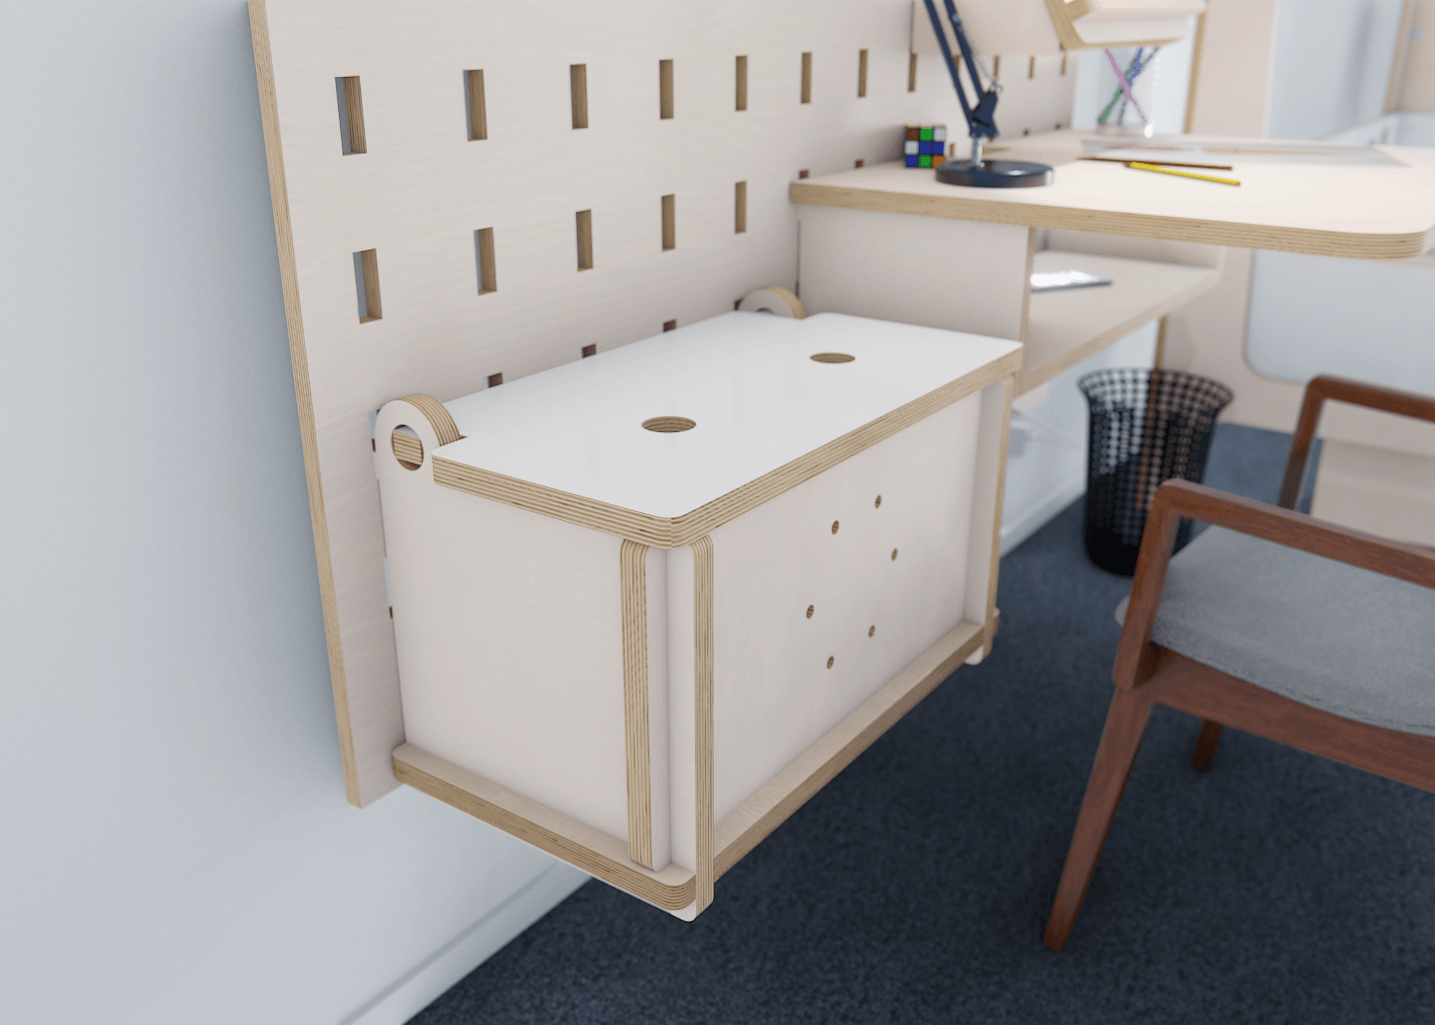 Unleash the potential of small spaces with our plywood pegboard and adjustable desk. Organise in style!